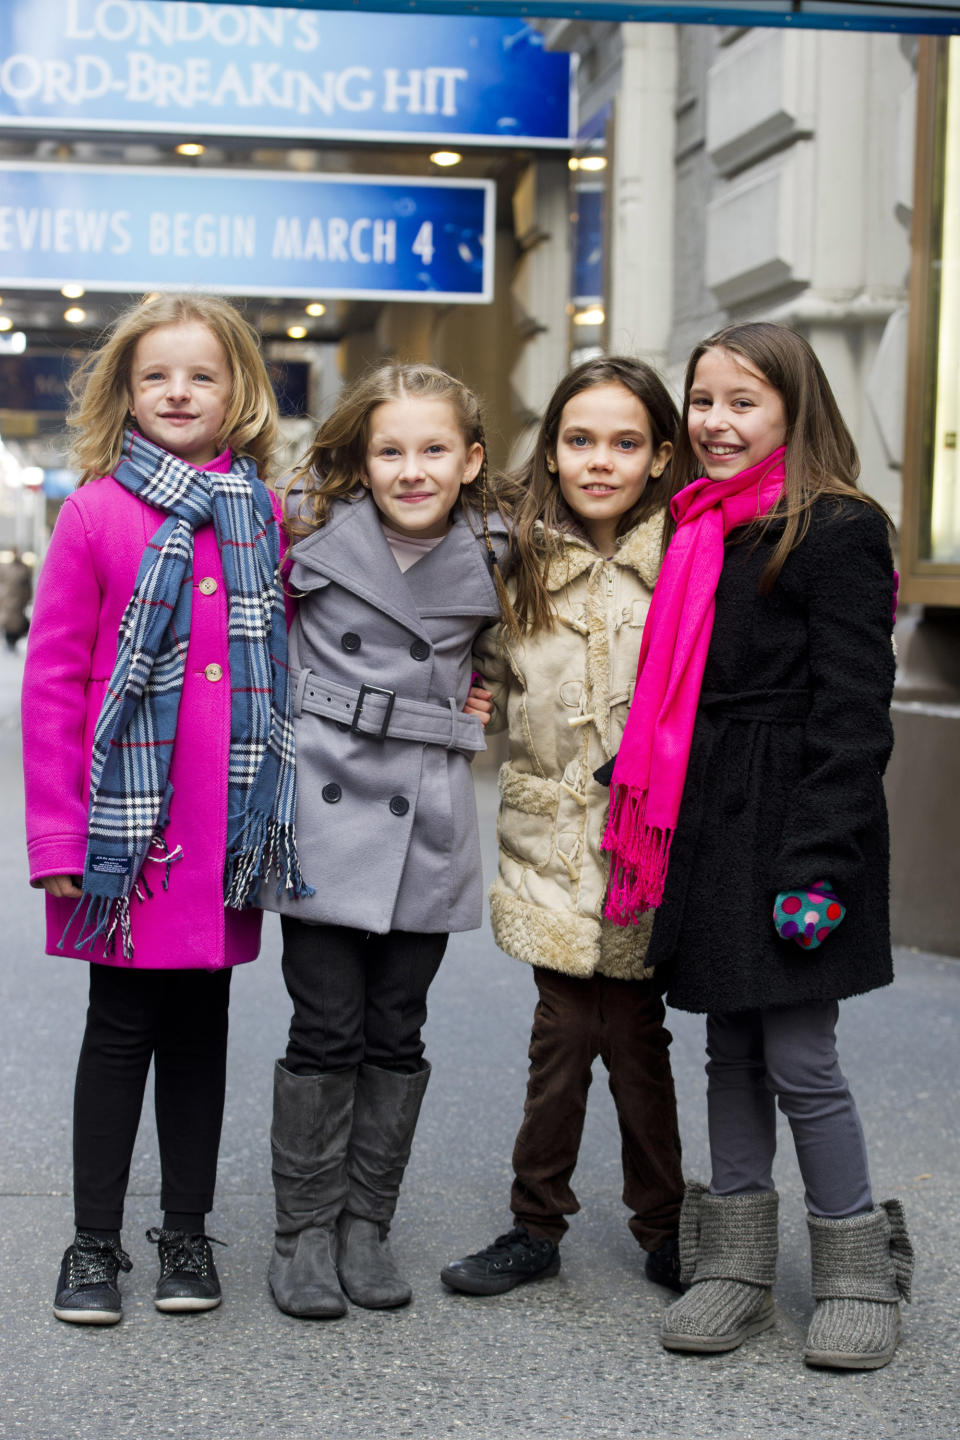 Actresses from left, Milly Shapiro, Sophia Gennusa, Oona Laurence and Bailey Ryon, who will share the title role in "Matilda the Musical" on Broadway, pose for a portrait outside the Shubert Theatre, on Thursday, Nov. 15, 2012 in New York. (Photo by Charles Sykes/Invision/AP)